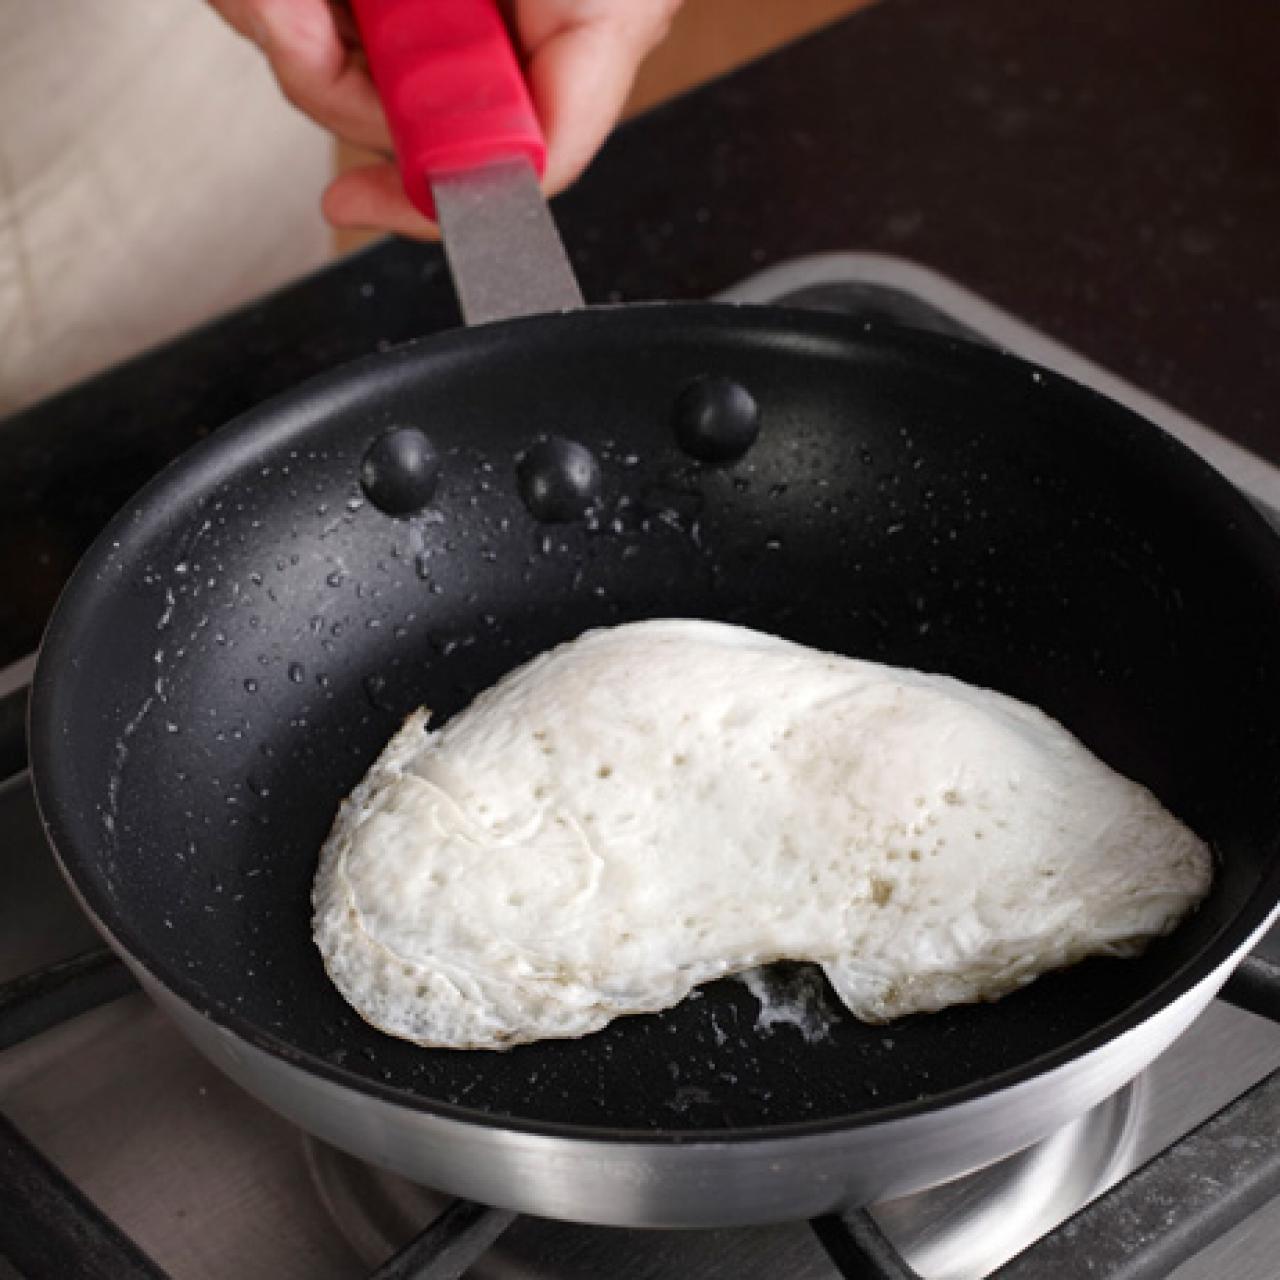 4-Cup Fried Egg Frying Pan with Brush for Oil, Non-stick Poached